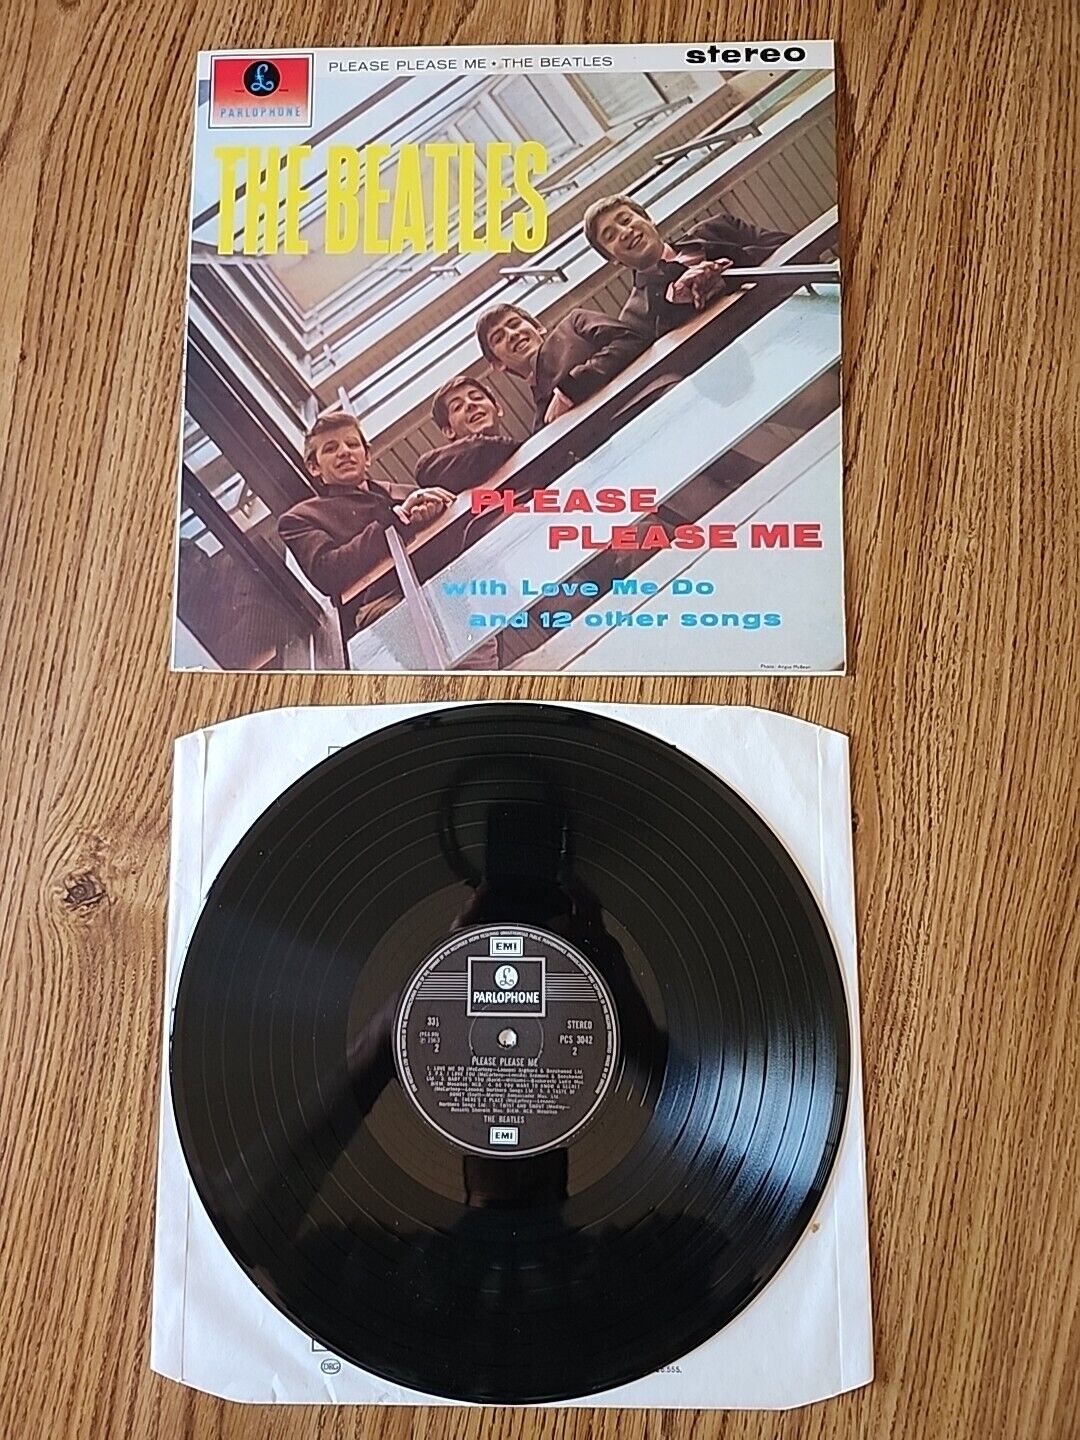 The Beatles \'Please Please Me\' 1980 stereo UK LP press out of a BC 13 box set ex